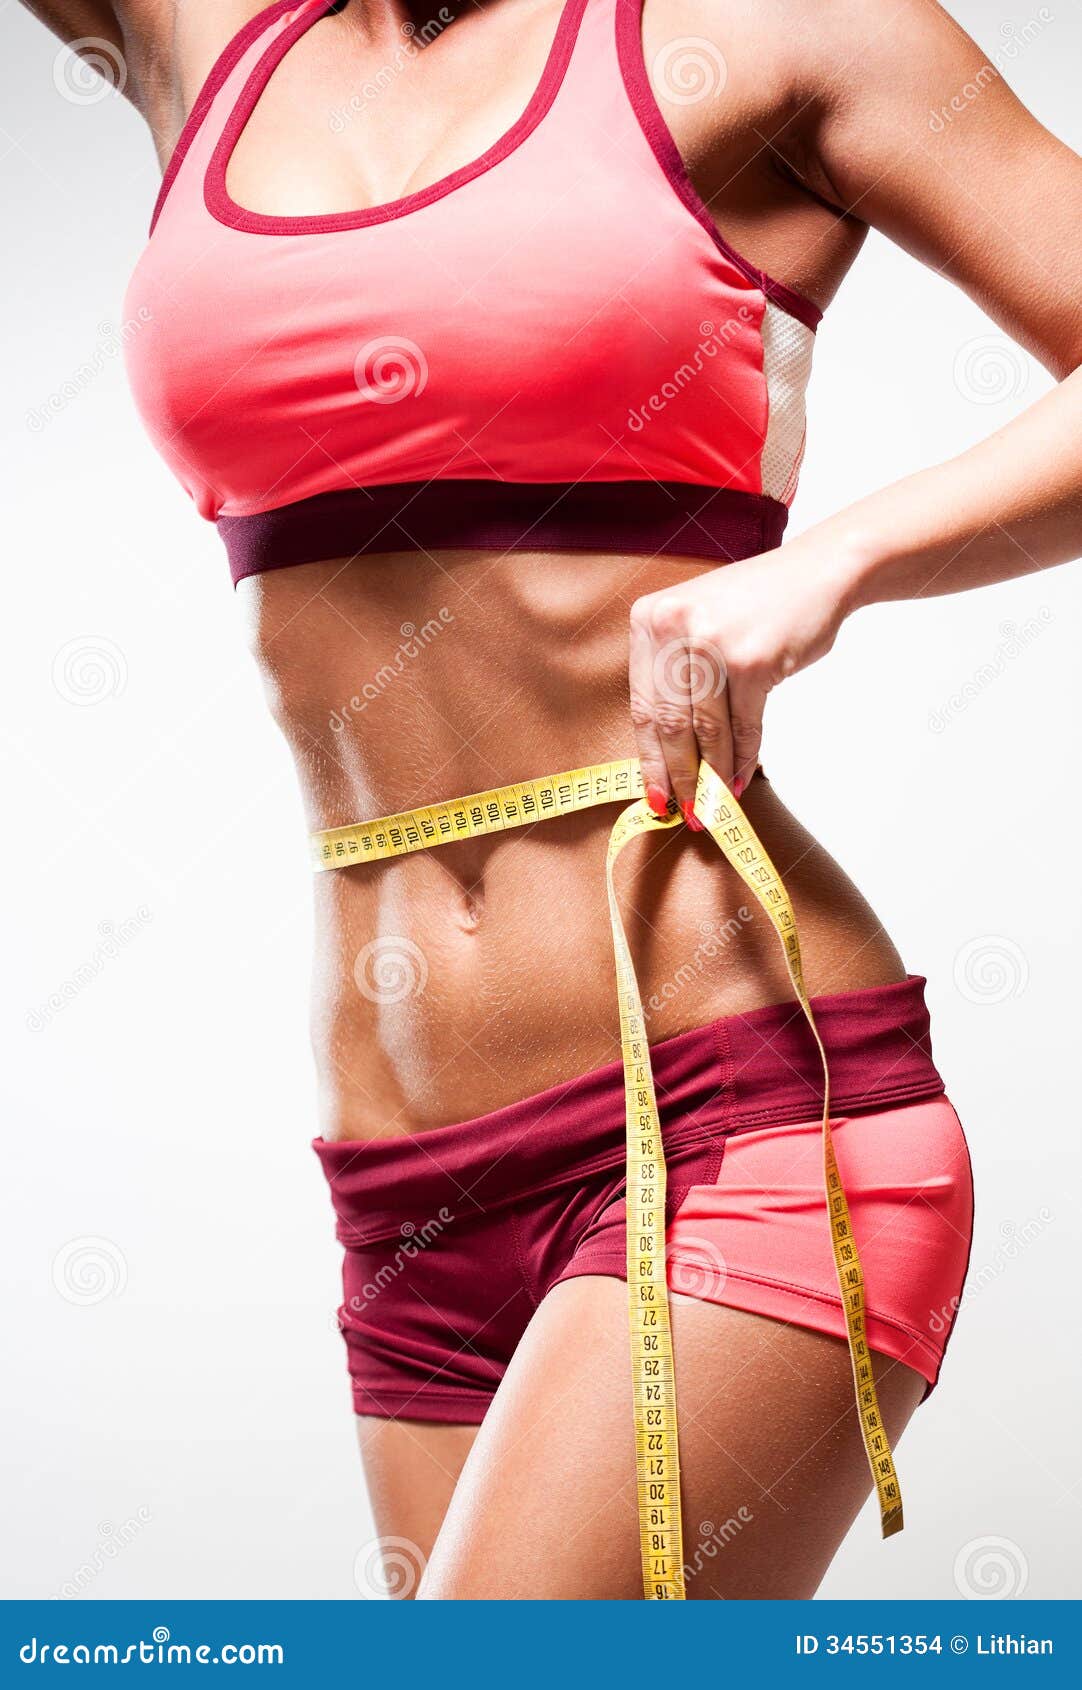 Obese man measuring waist with tape measure - SuperStock